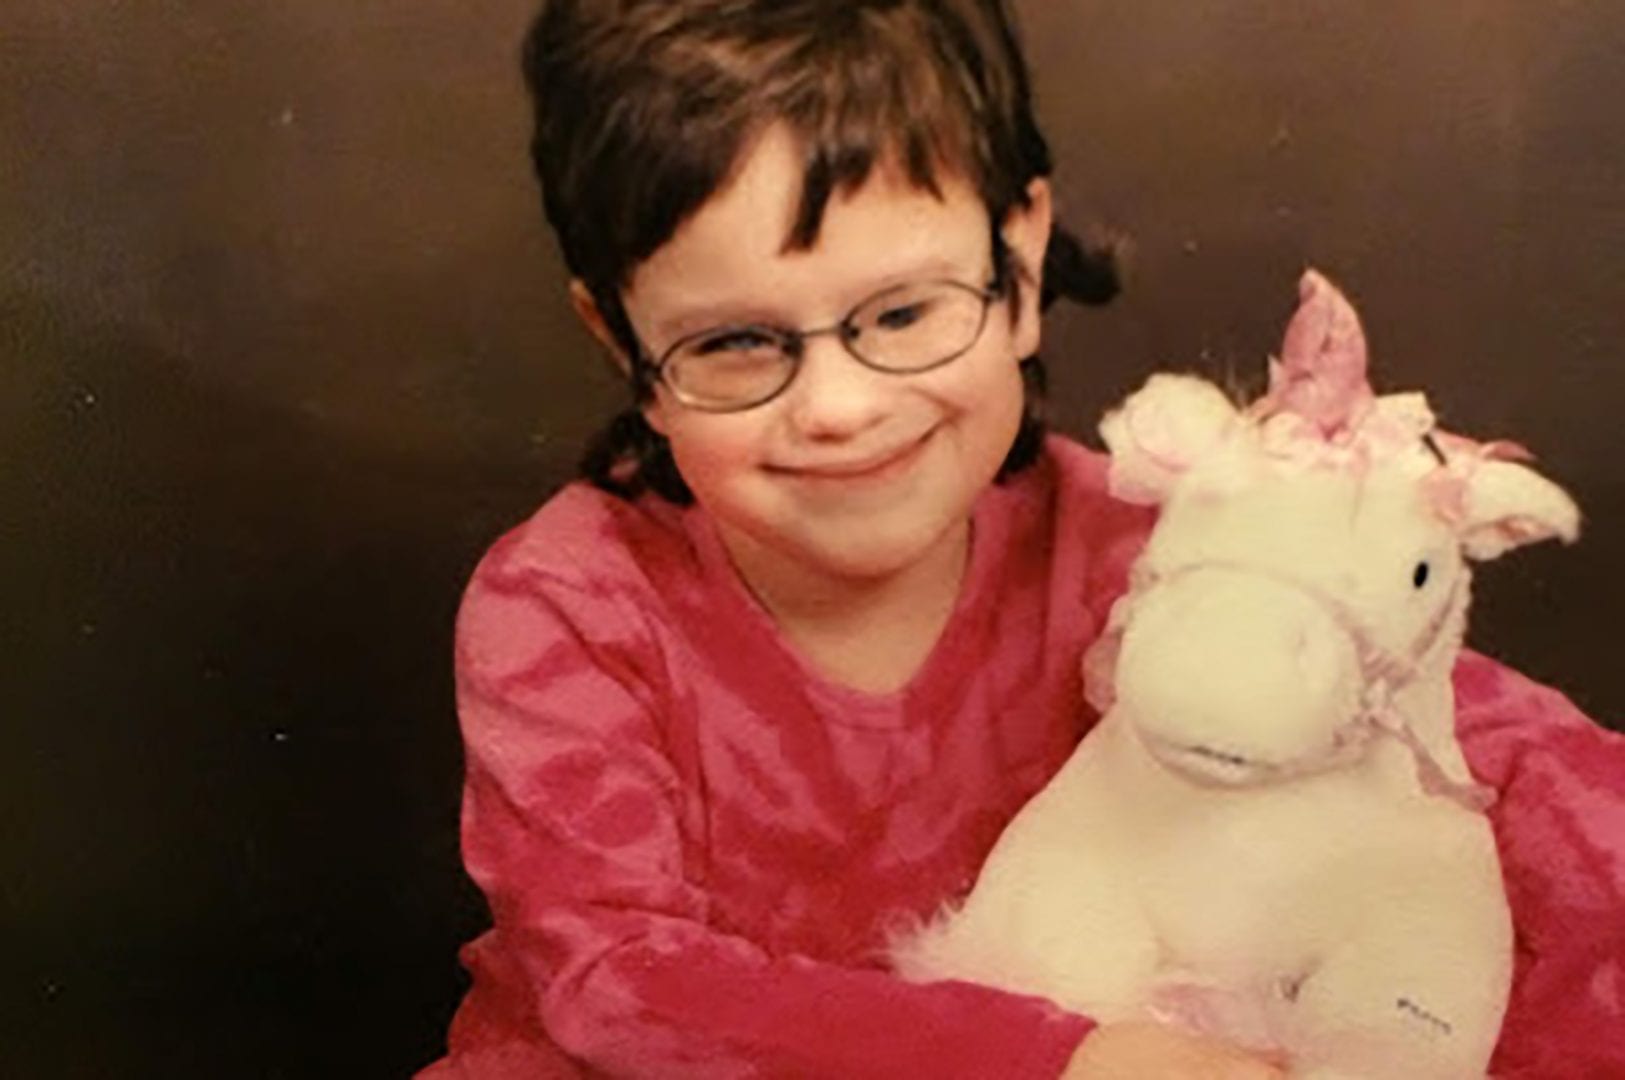 Young Jessica posing for a photo with a stuffed unicorn